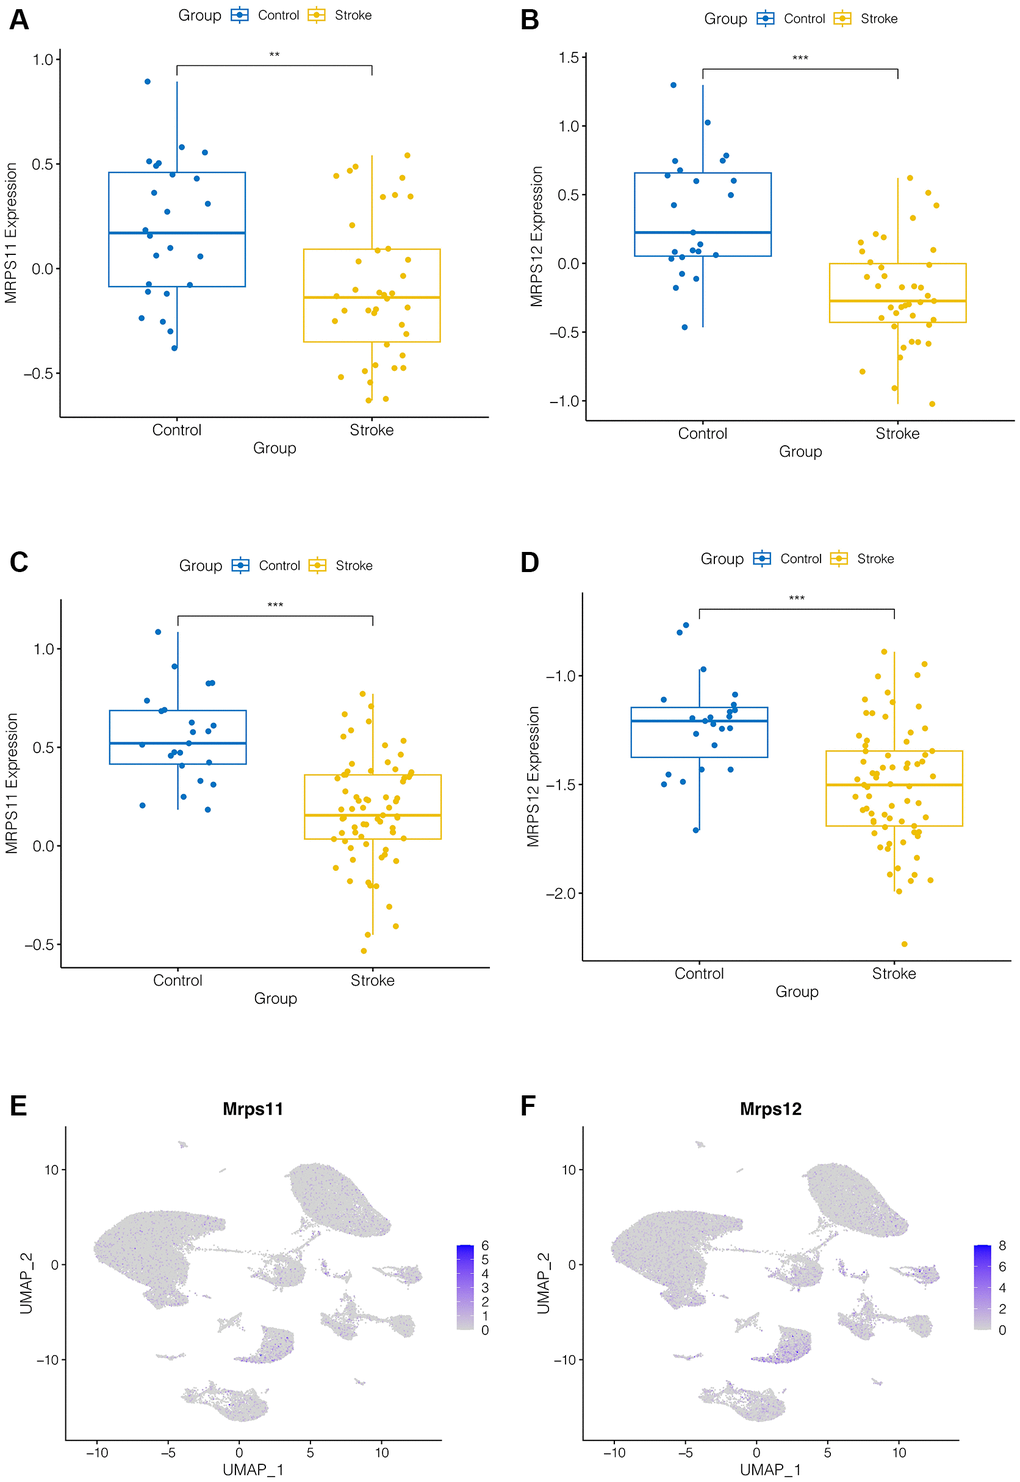 Expression analysis of hub genes. (A–D) MRPS11 and MRPS12 were down-regulated in ischemic stroke patients in the GSE16561 and GSE58294 data sets (p E, F) Expression analysis of MRPS11 and MRPS12 in single cell data.